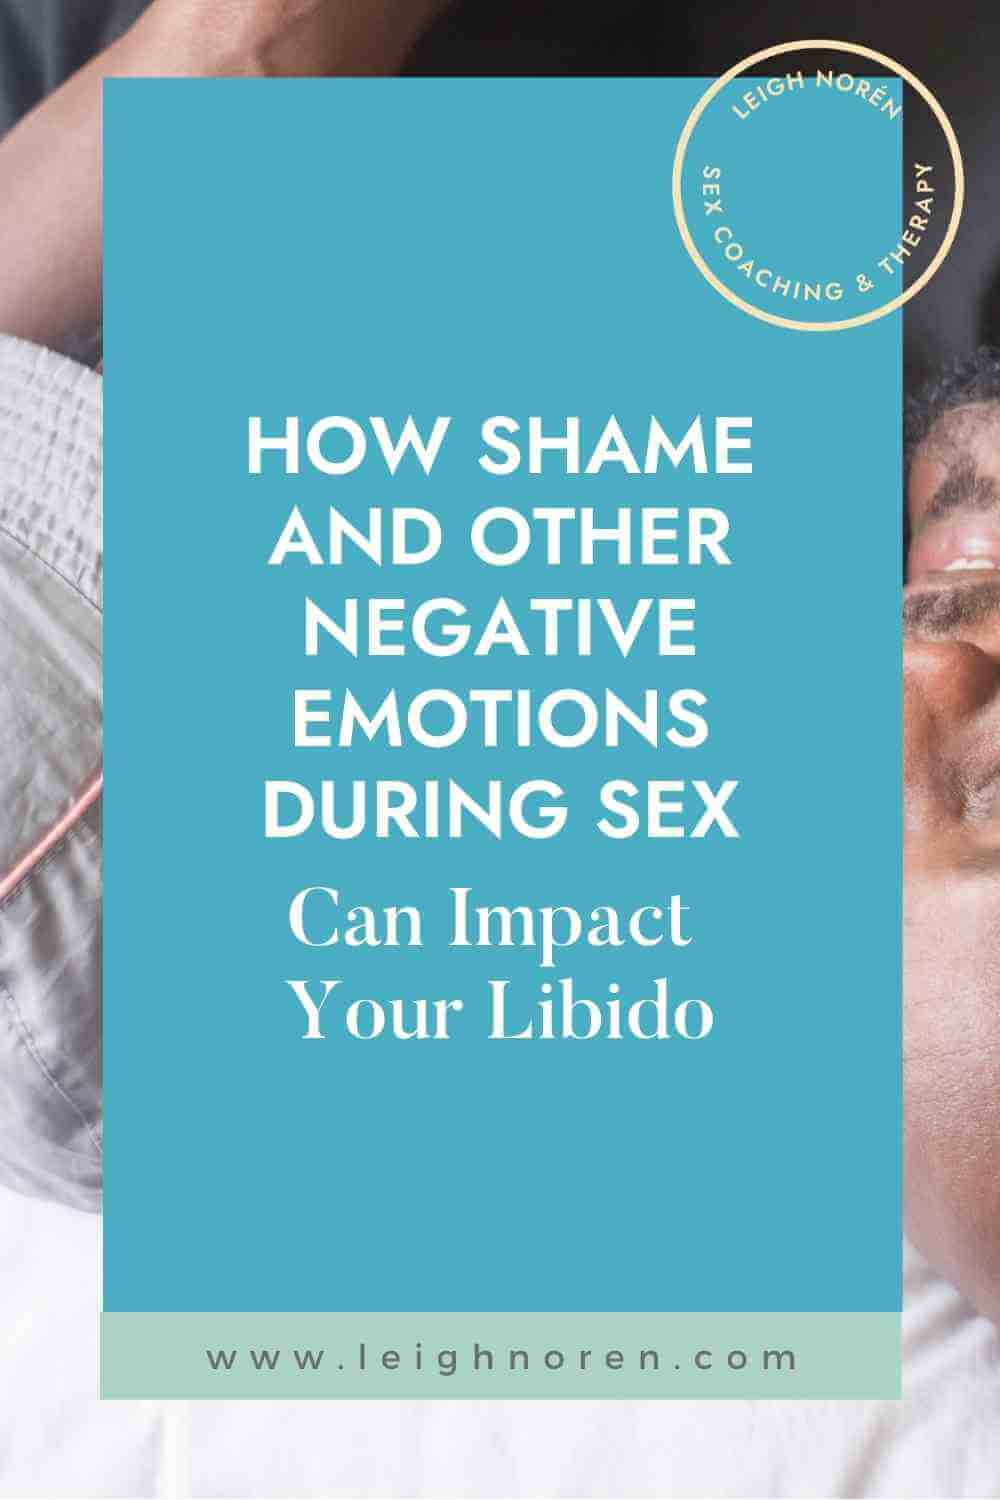 How Shame & Other Negative Emotions During Sex Can Impact Your Libido